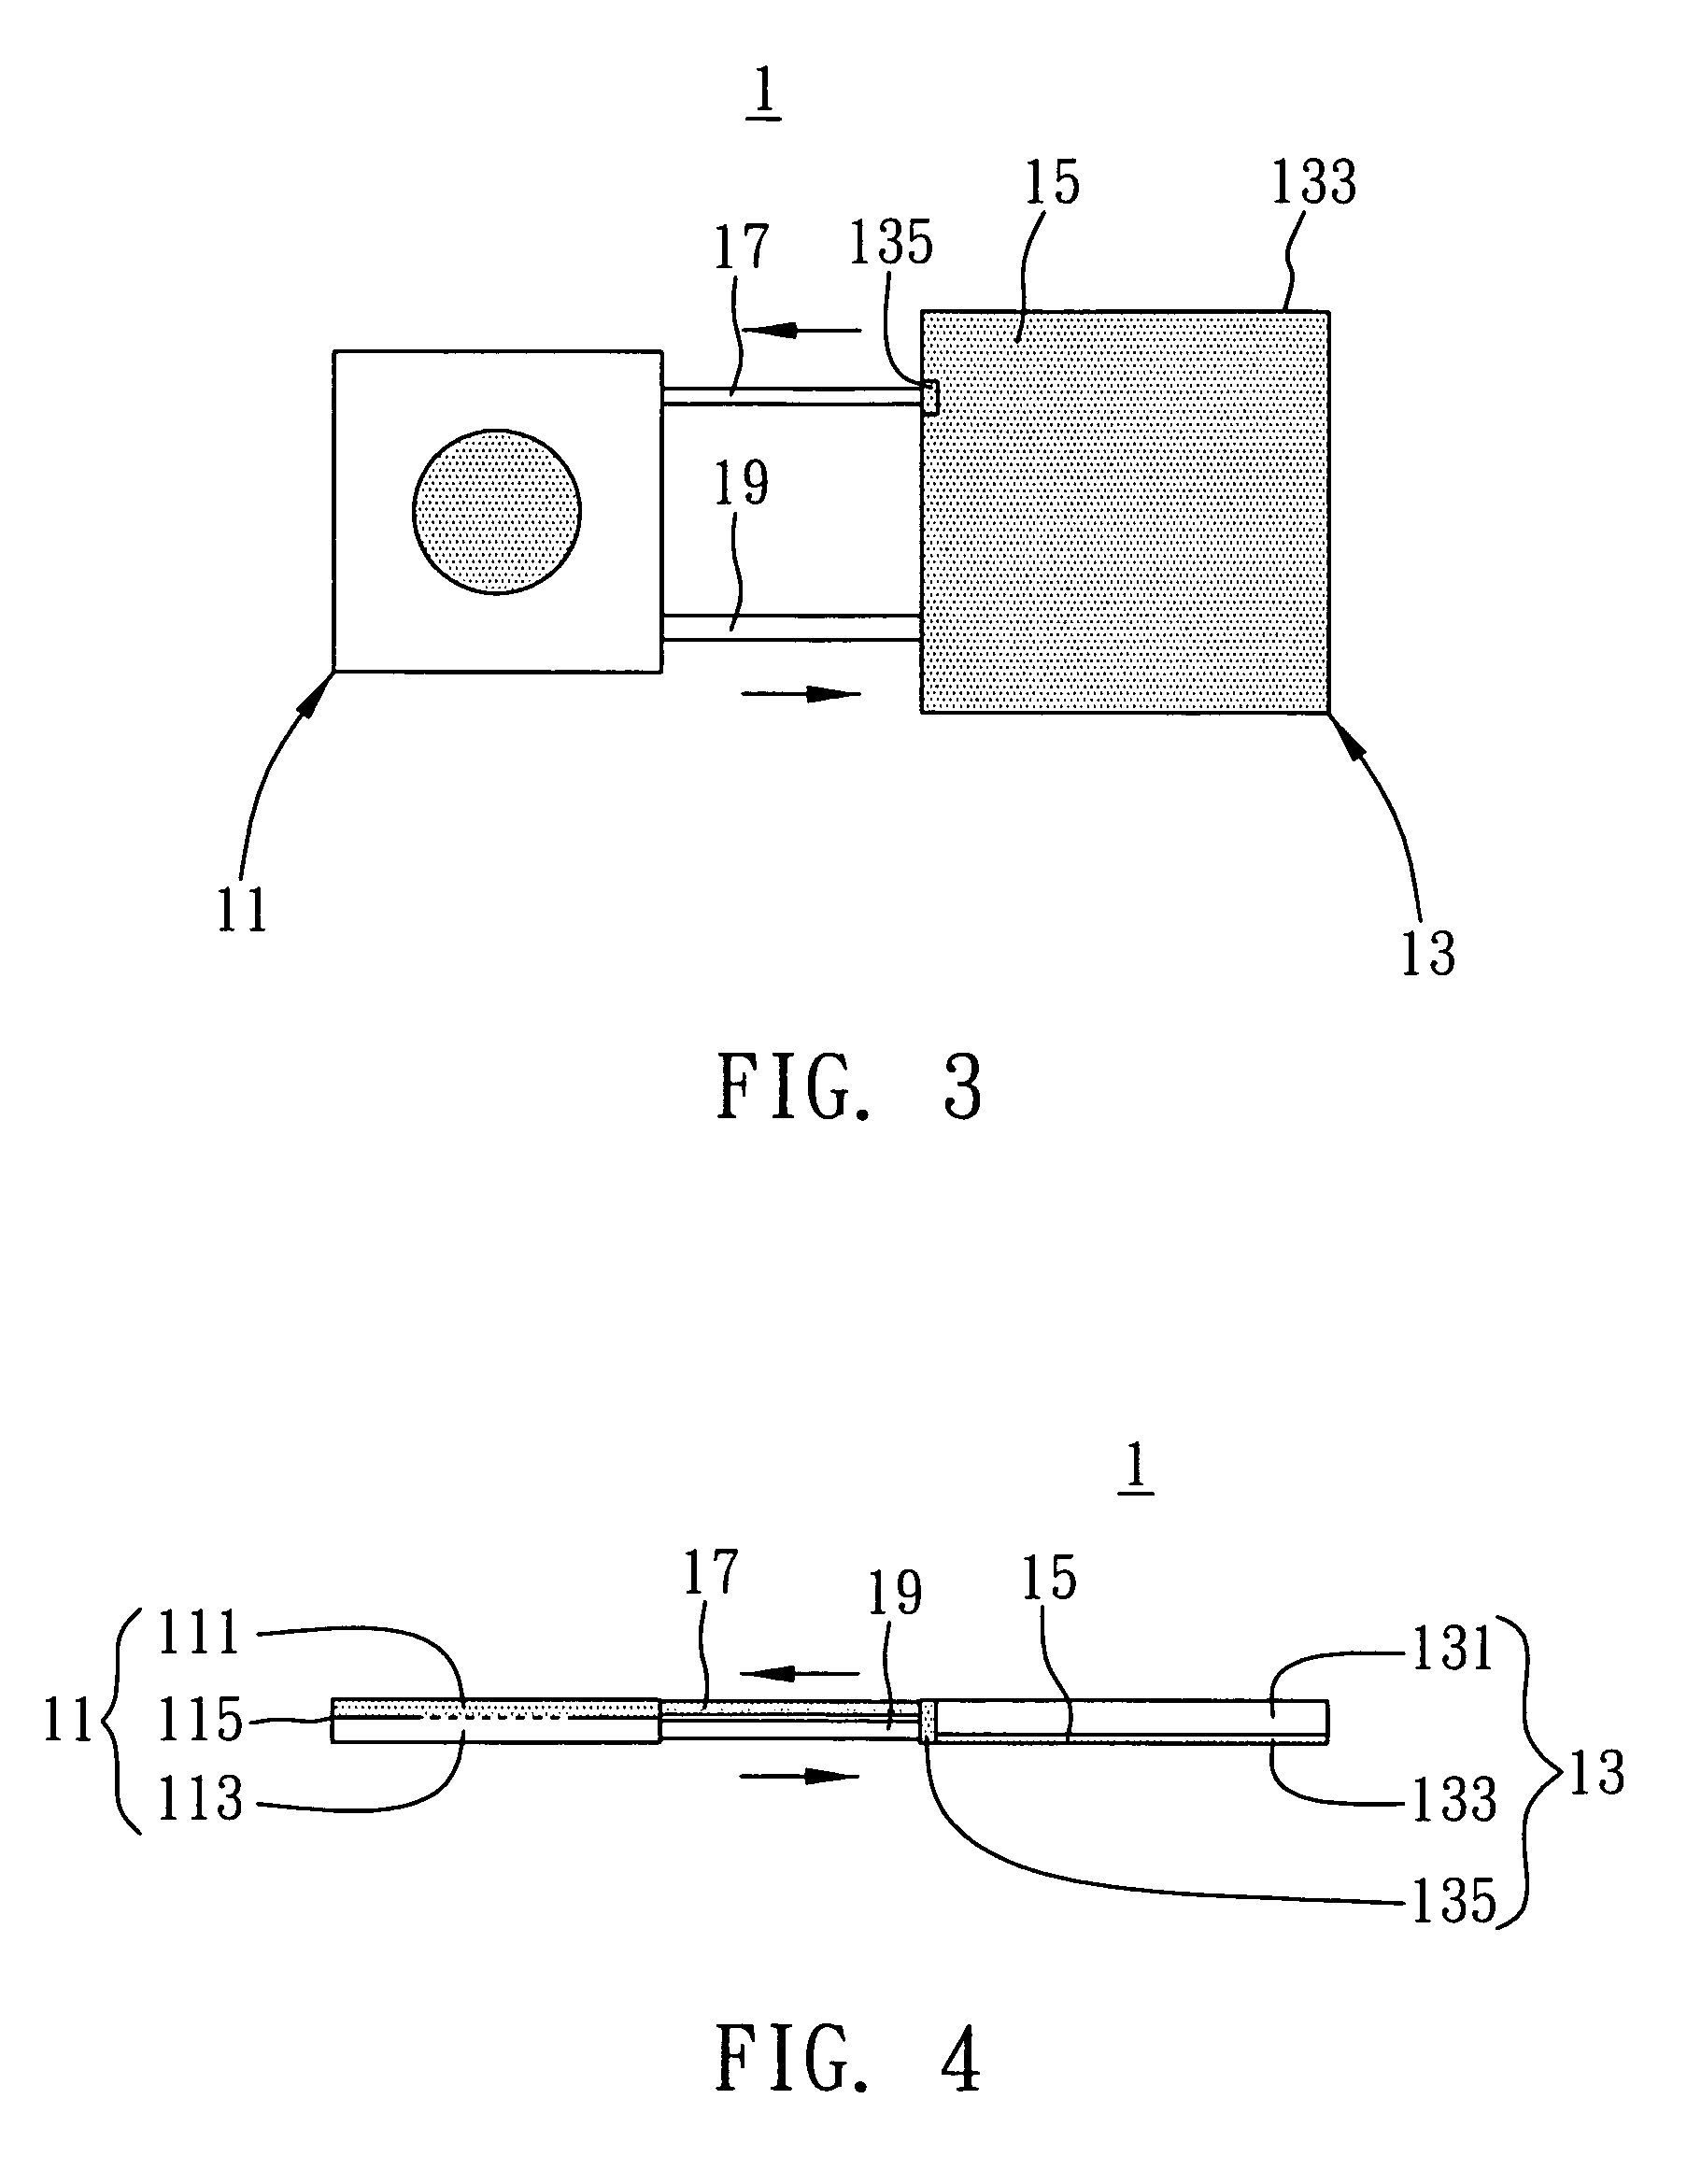 Loop type heat dissipating apparatus with sprayer